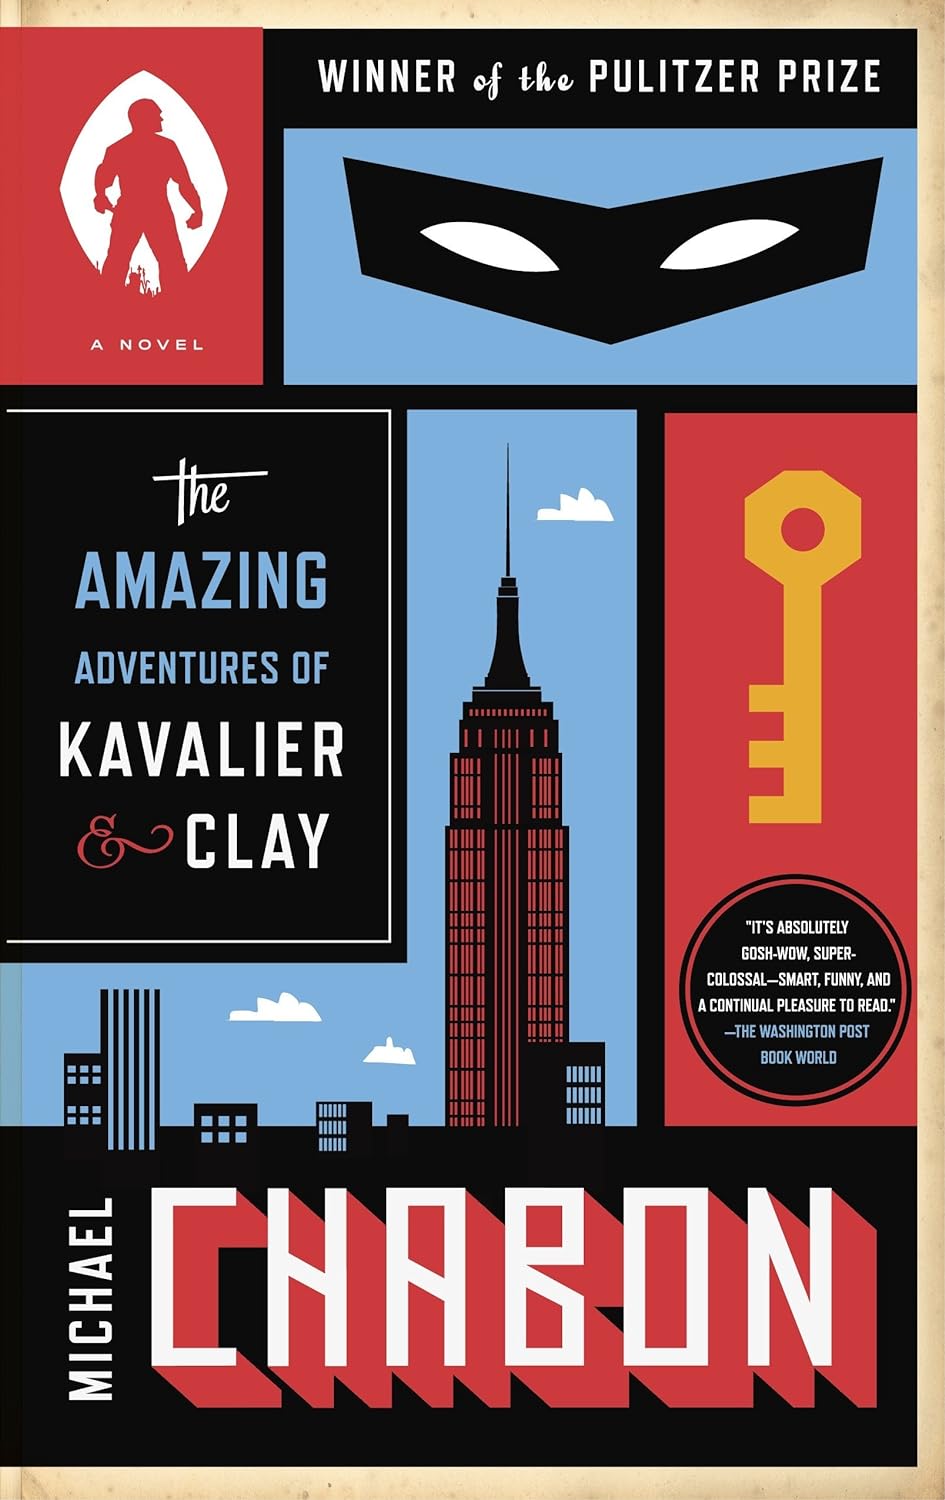 The Amazing Adventures of Kavalier & Clay image